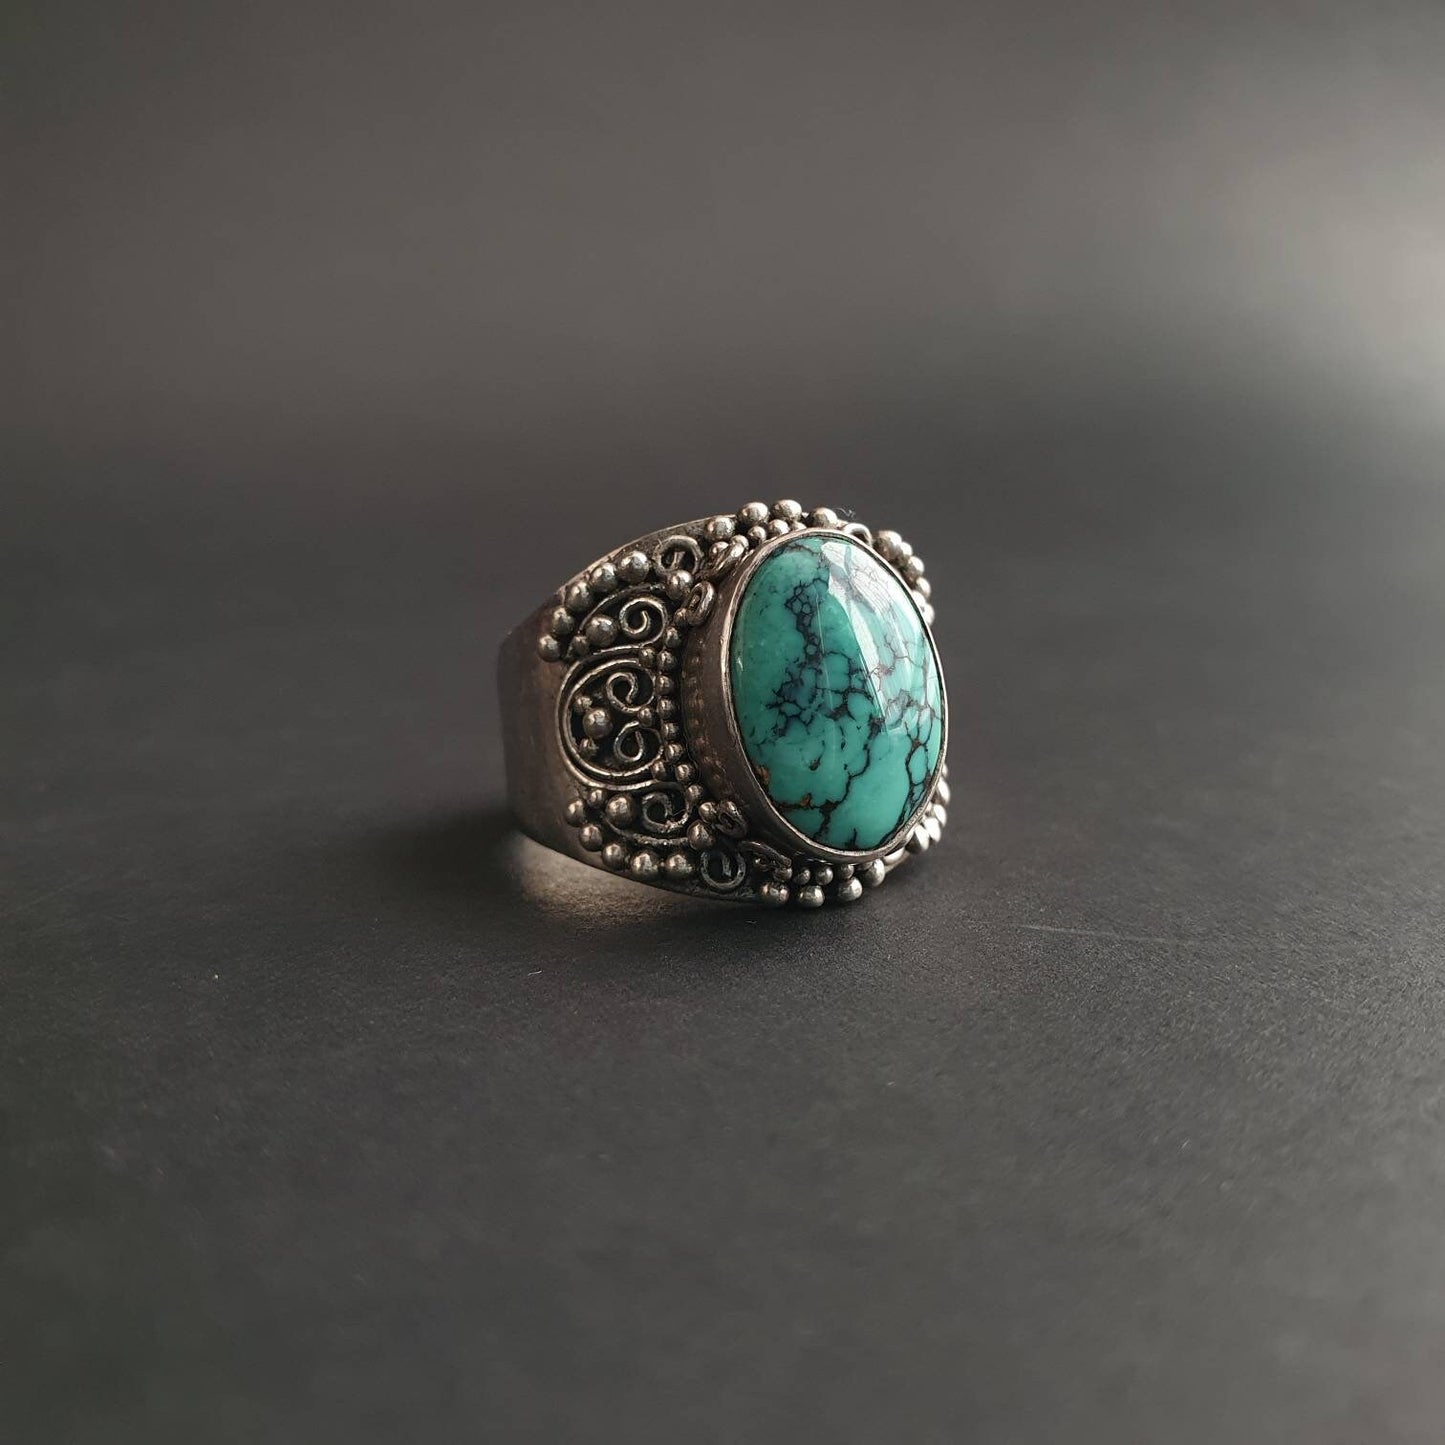 Ring - Vintage, Turquoise  Heavy gauge Sterling Silver,Tibetan Nepalese antique oval turquoise ring unisex gifts fine filigree work 999